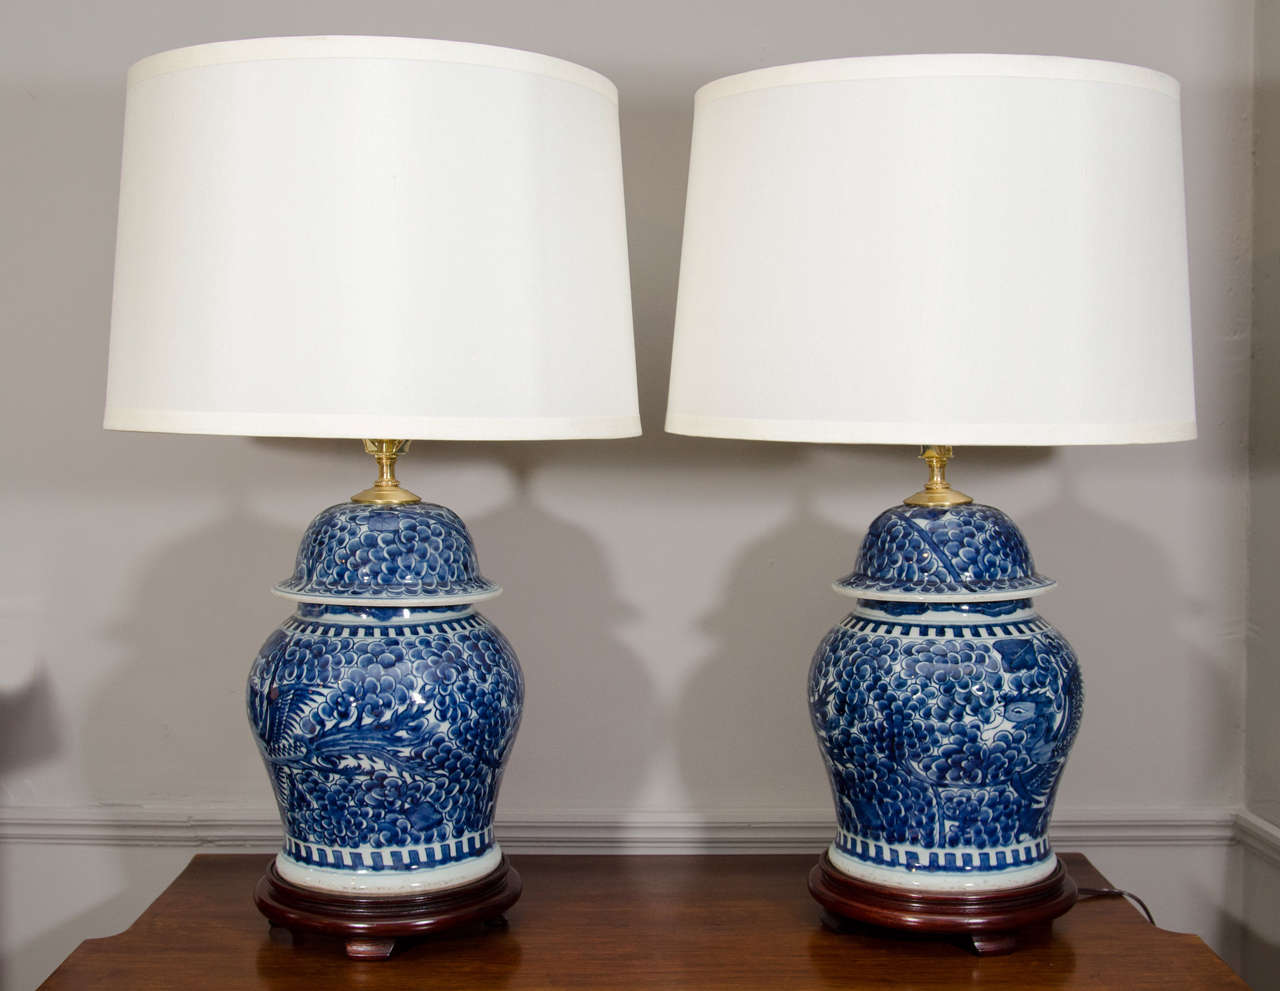 Pair Of Blue And White Porcelain Chinese Temple Jar Lamps.
20th Century.